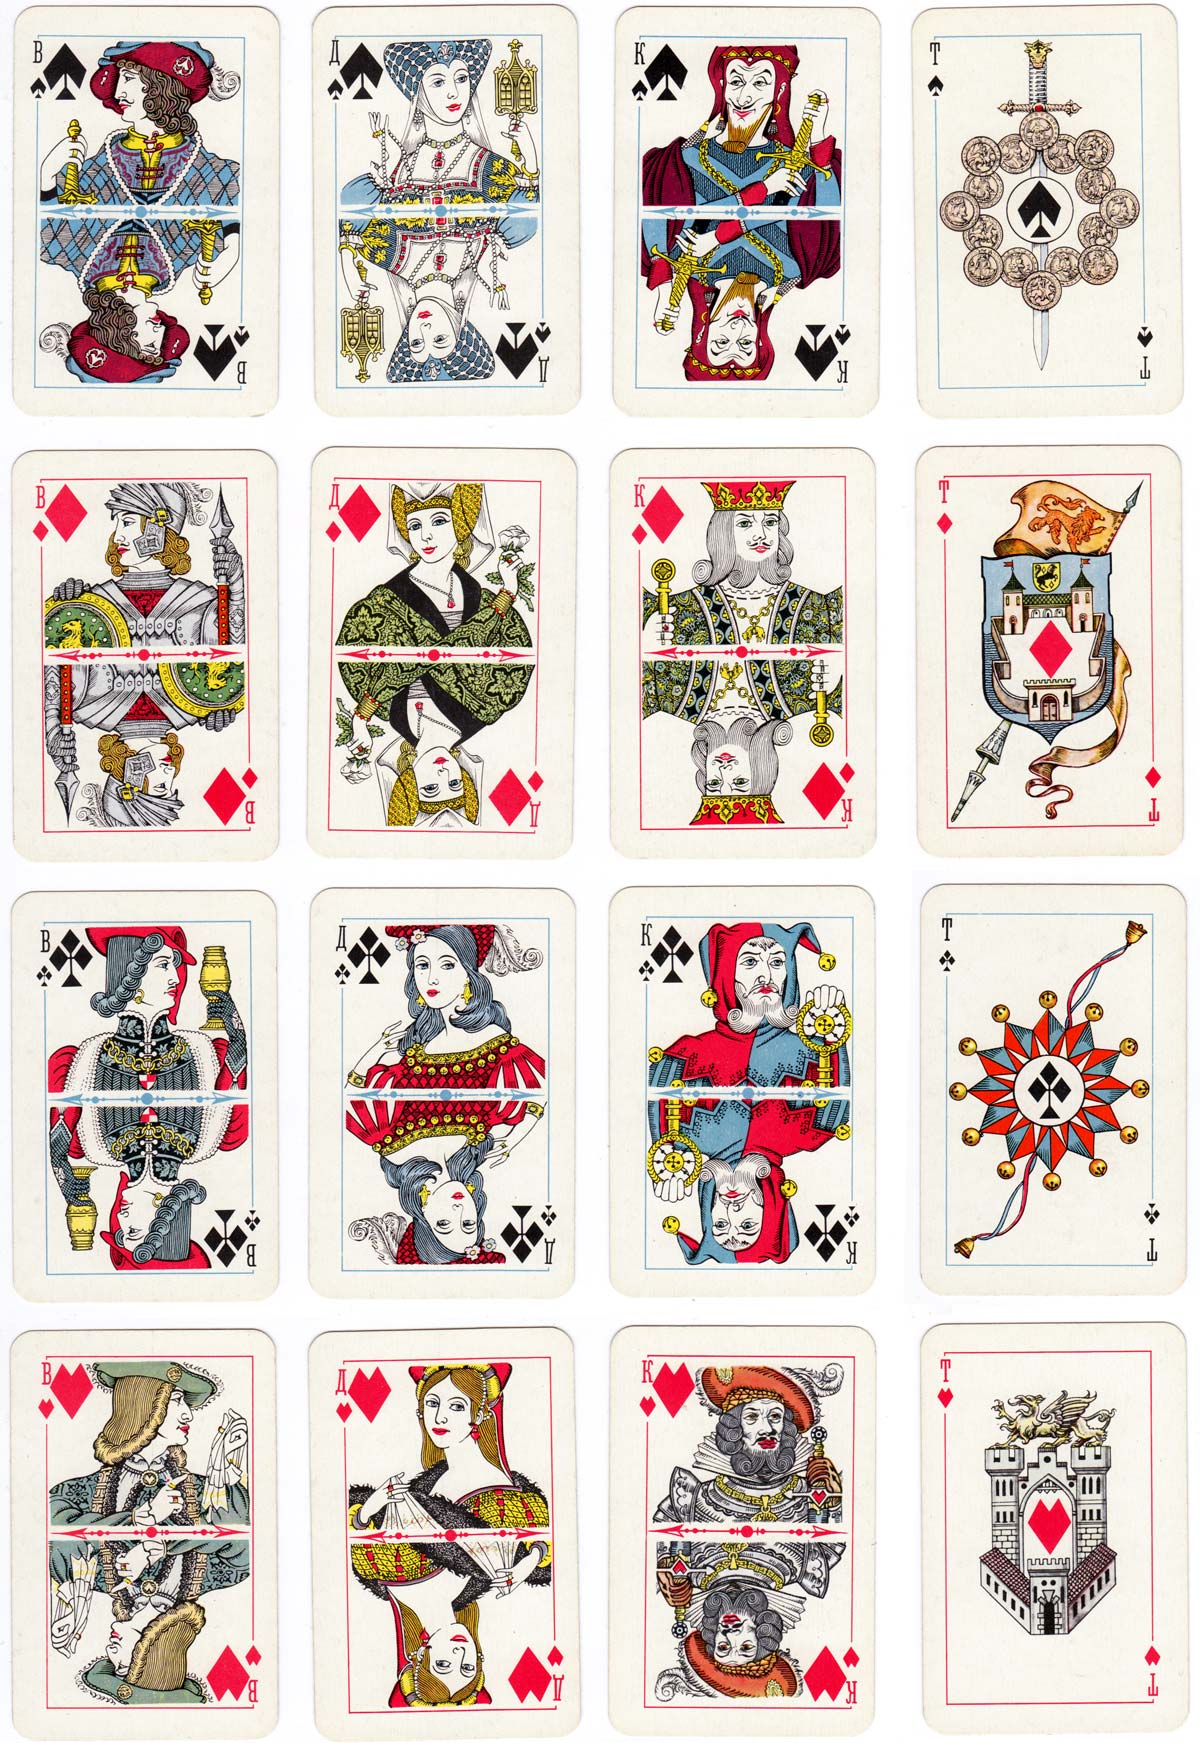 Russian Opera & Theatre Scenes playing cards first published by the Colour Printing Plant (USSR, Russian Federation) in 1973